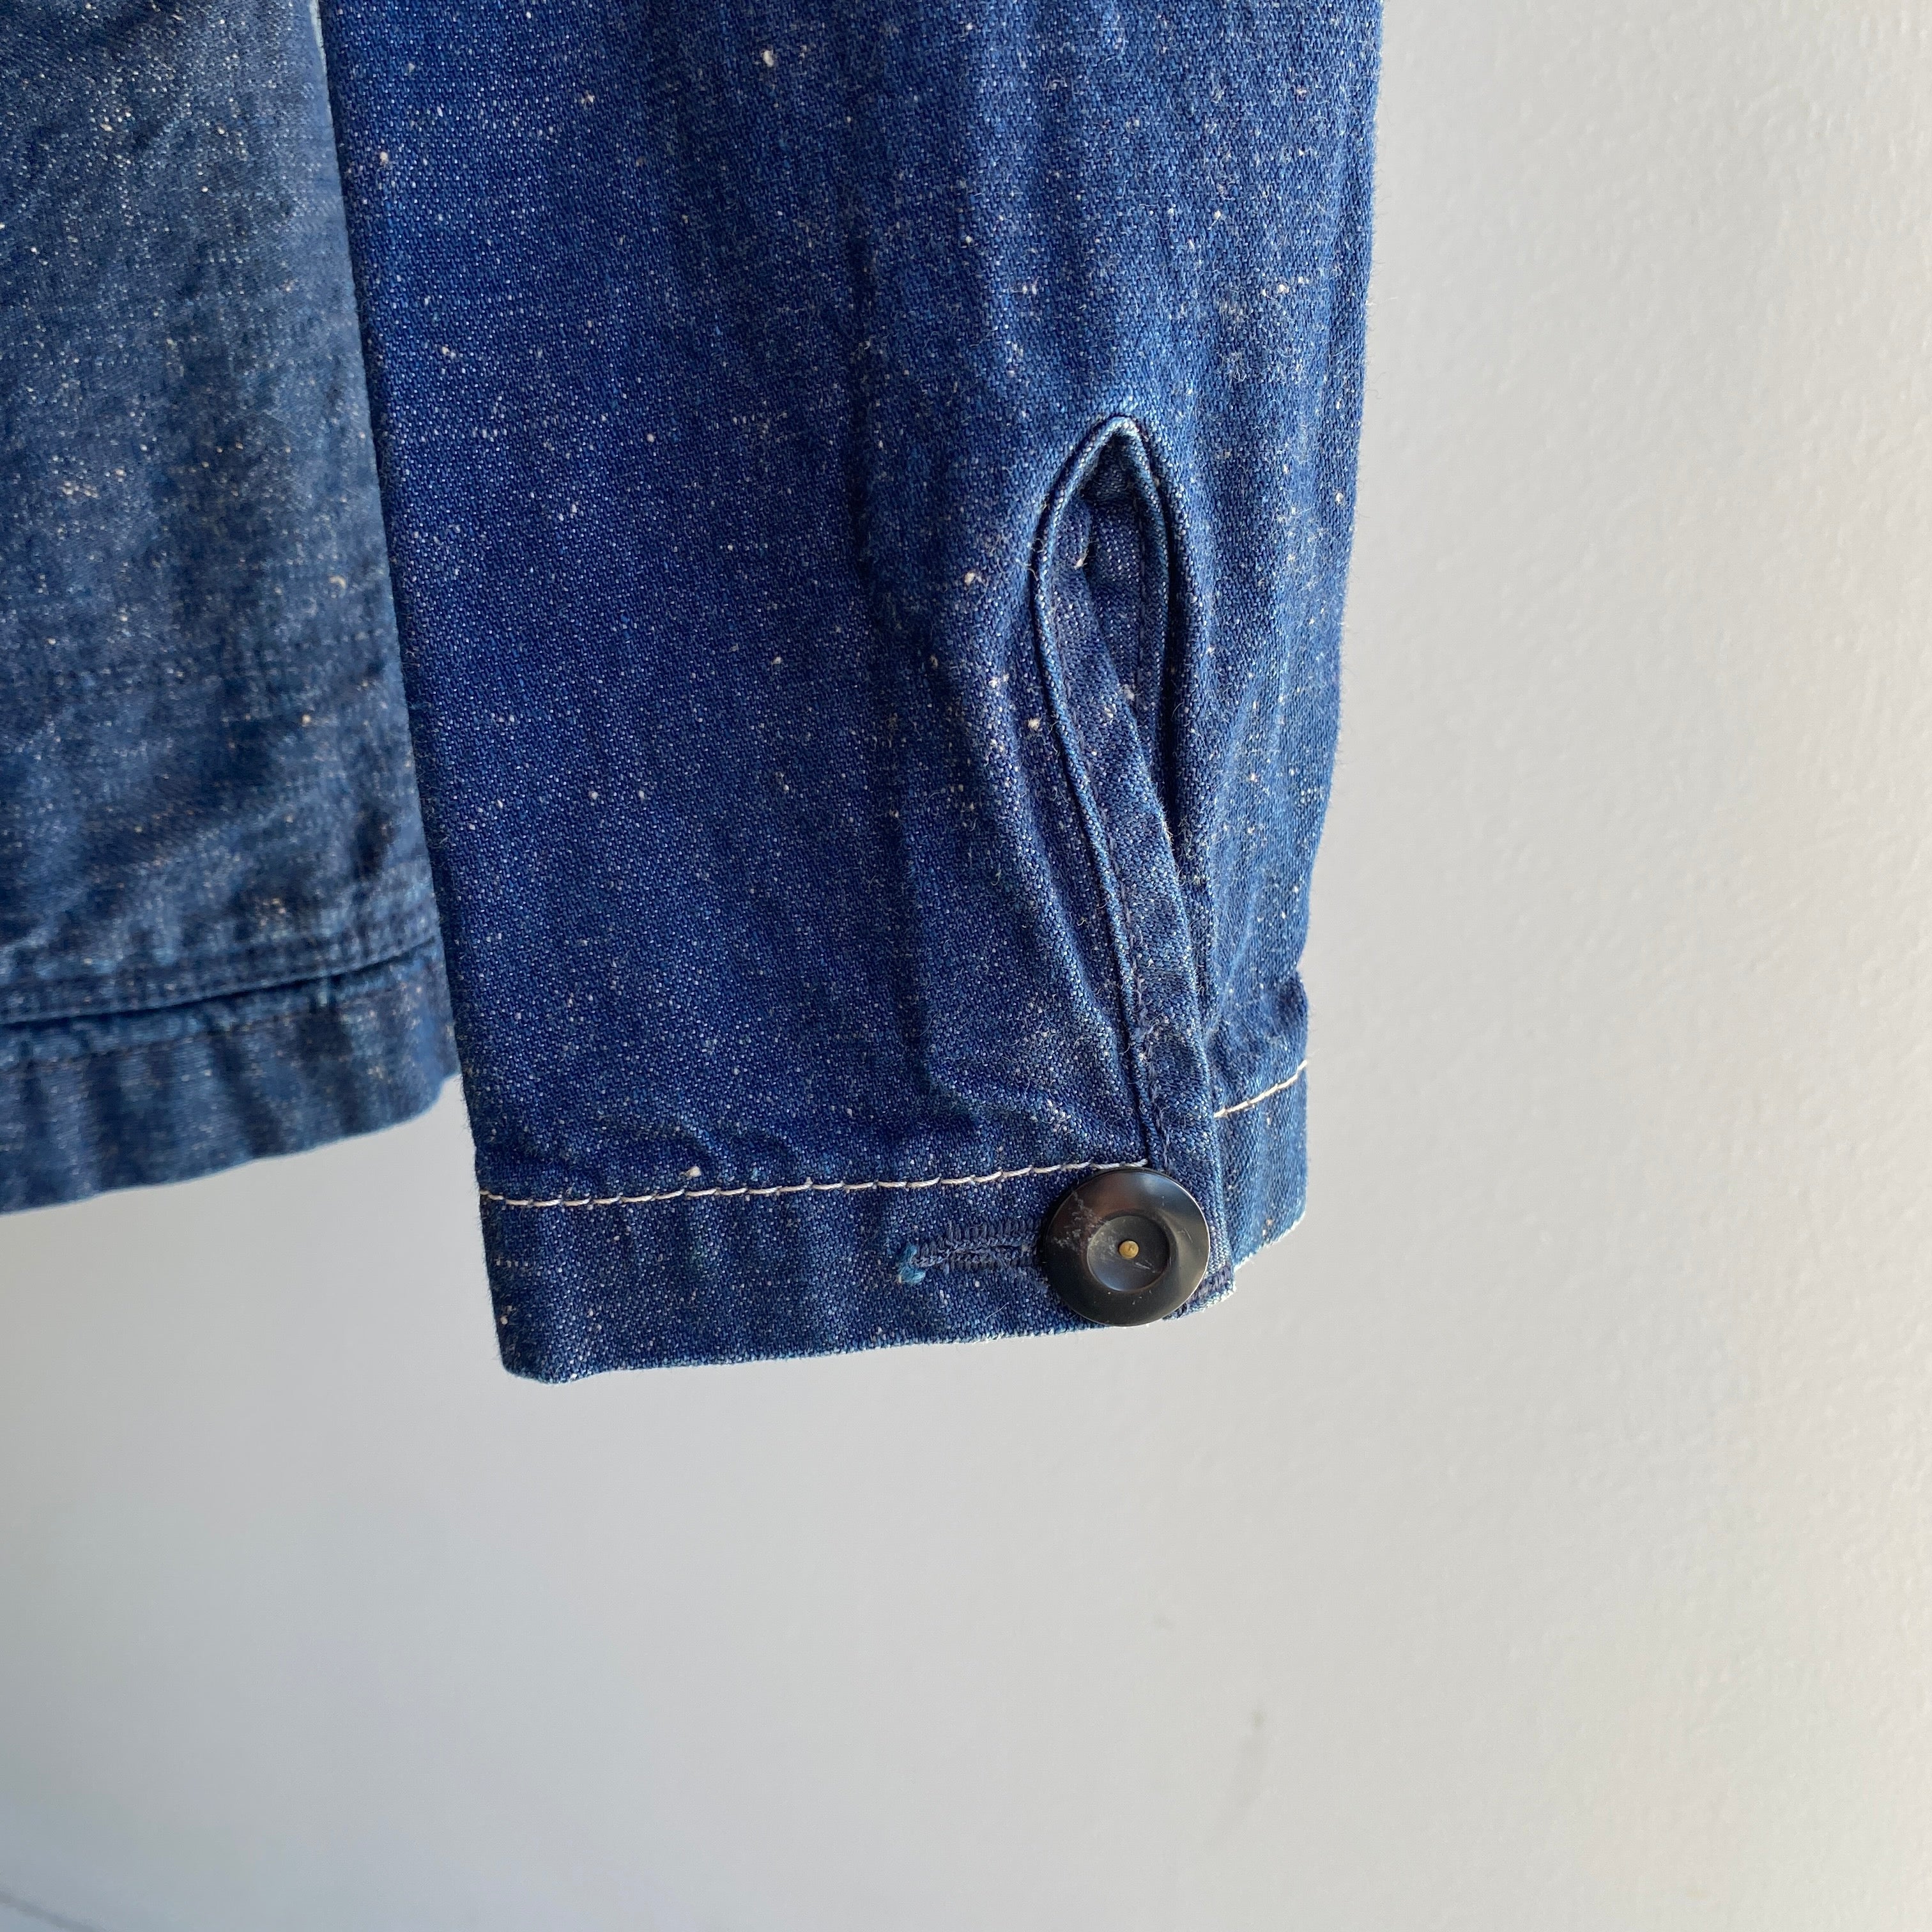 1980/90s Japanese Denim Chore Coat with Workwear Buttons